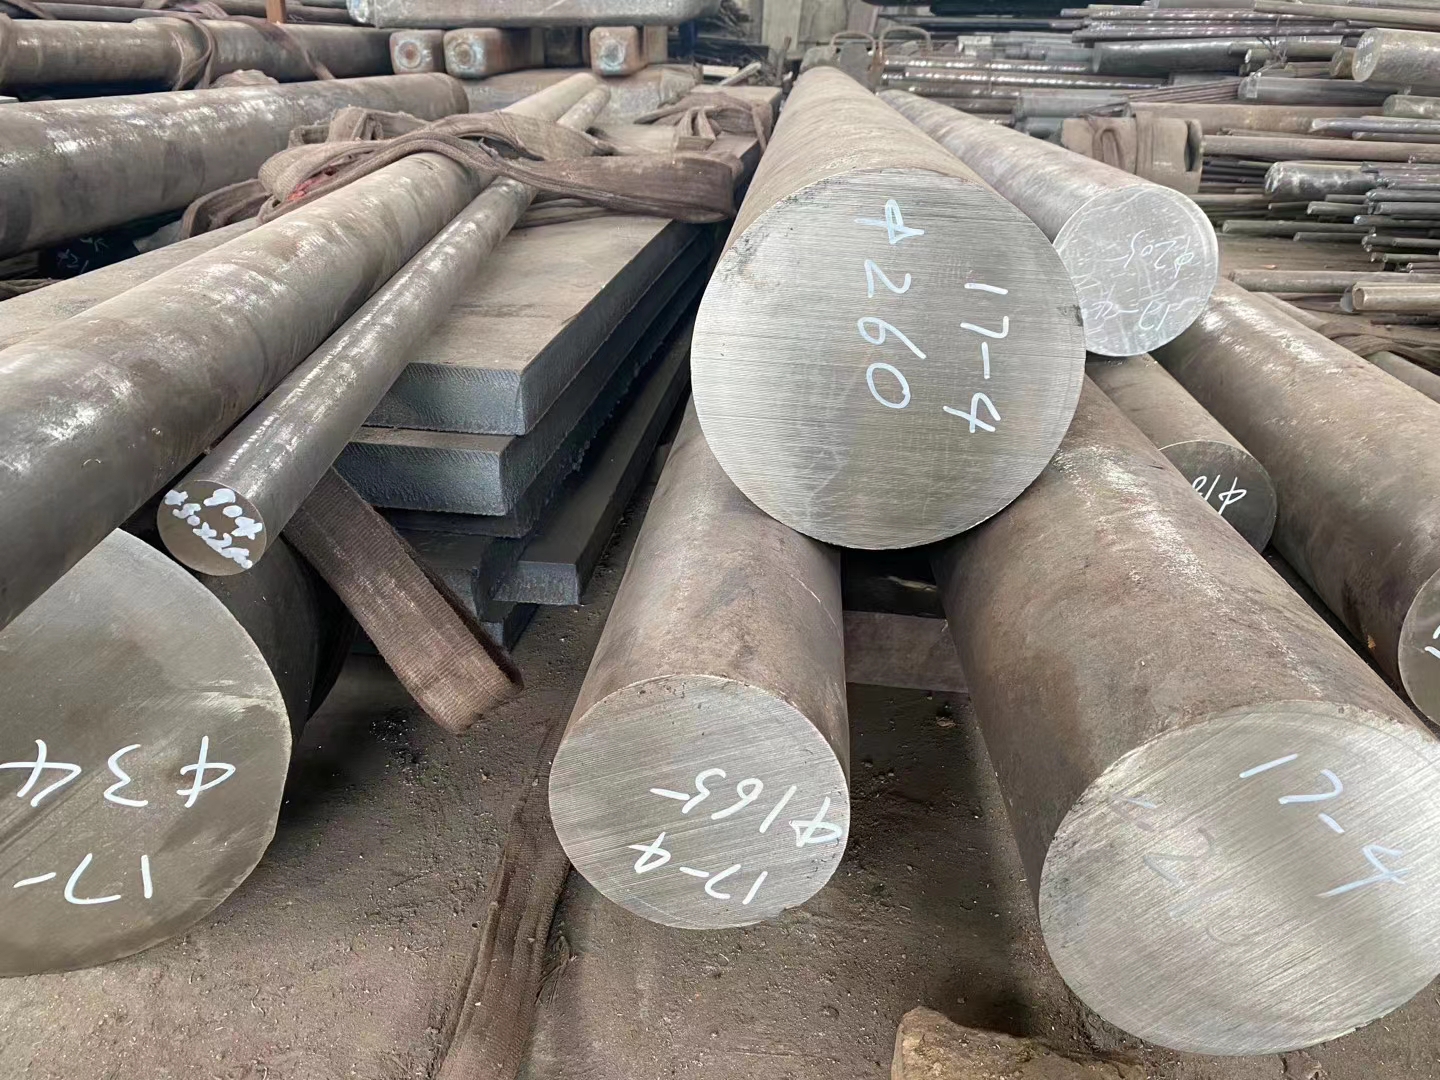 China Cheap price Stainless Steel Pipe - 17-4 PH Stainless Steel Bar – 17-4 ASTM A564 Supplier – Cepheus